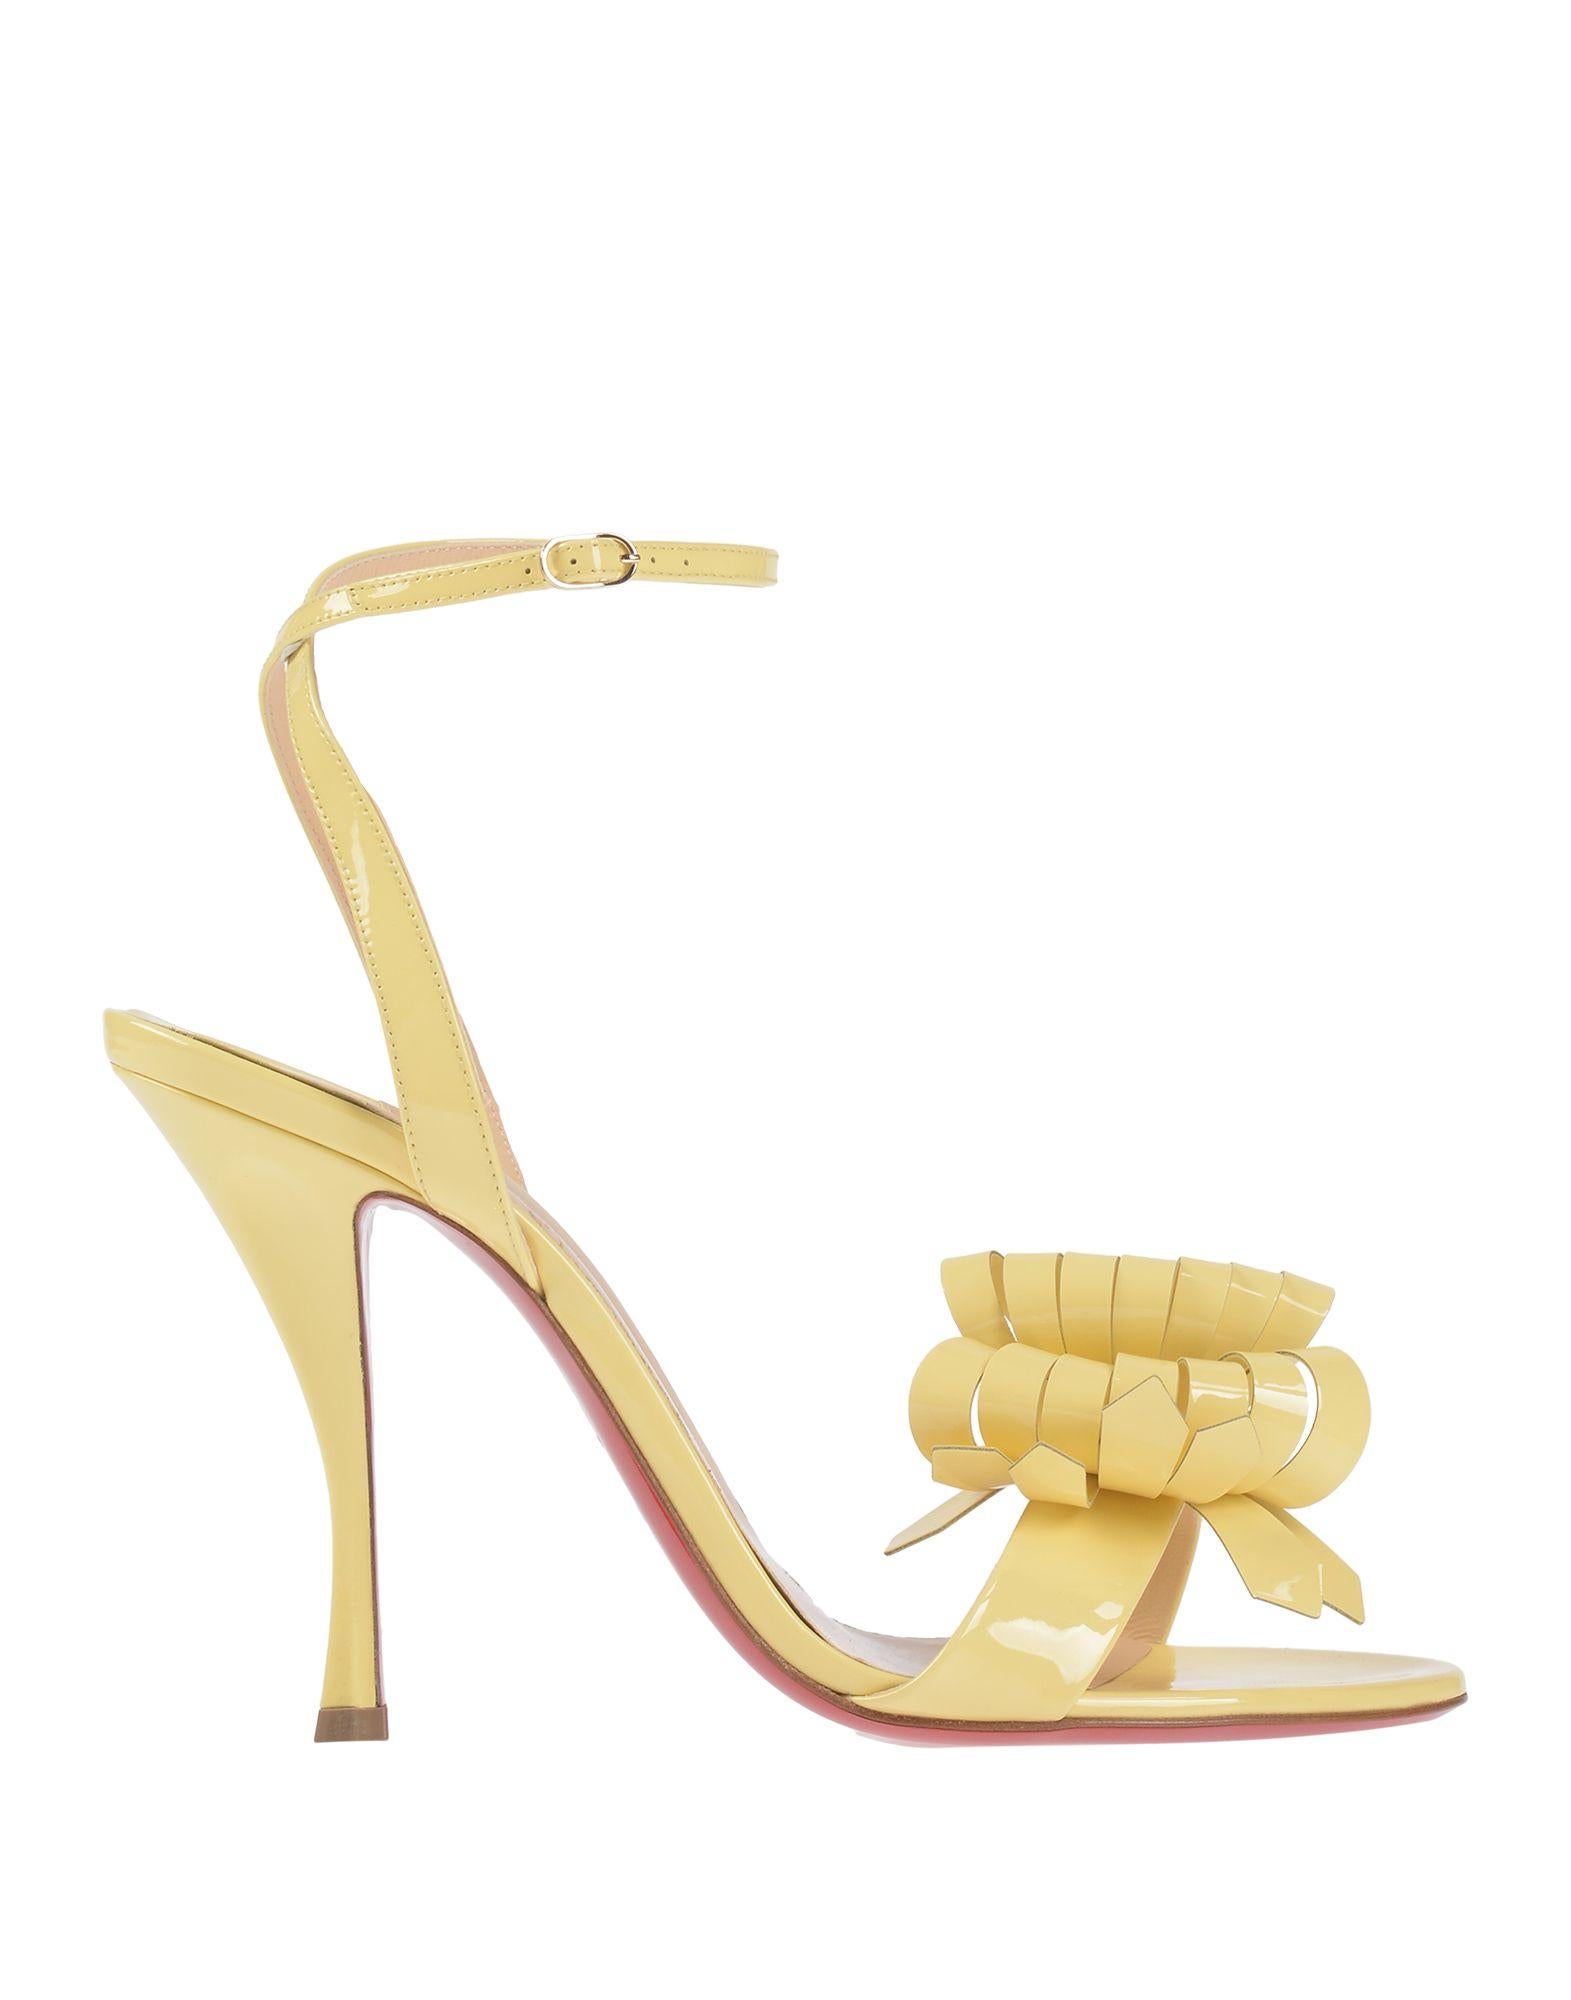 Christian Louboutin NEW Yellow Patent Bow Evening Sandals Heels in Box (Gelb)